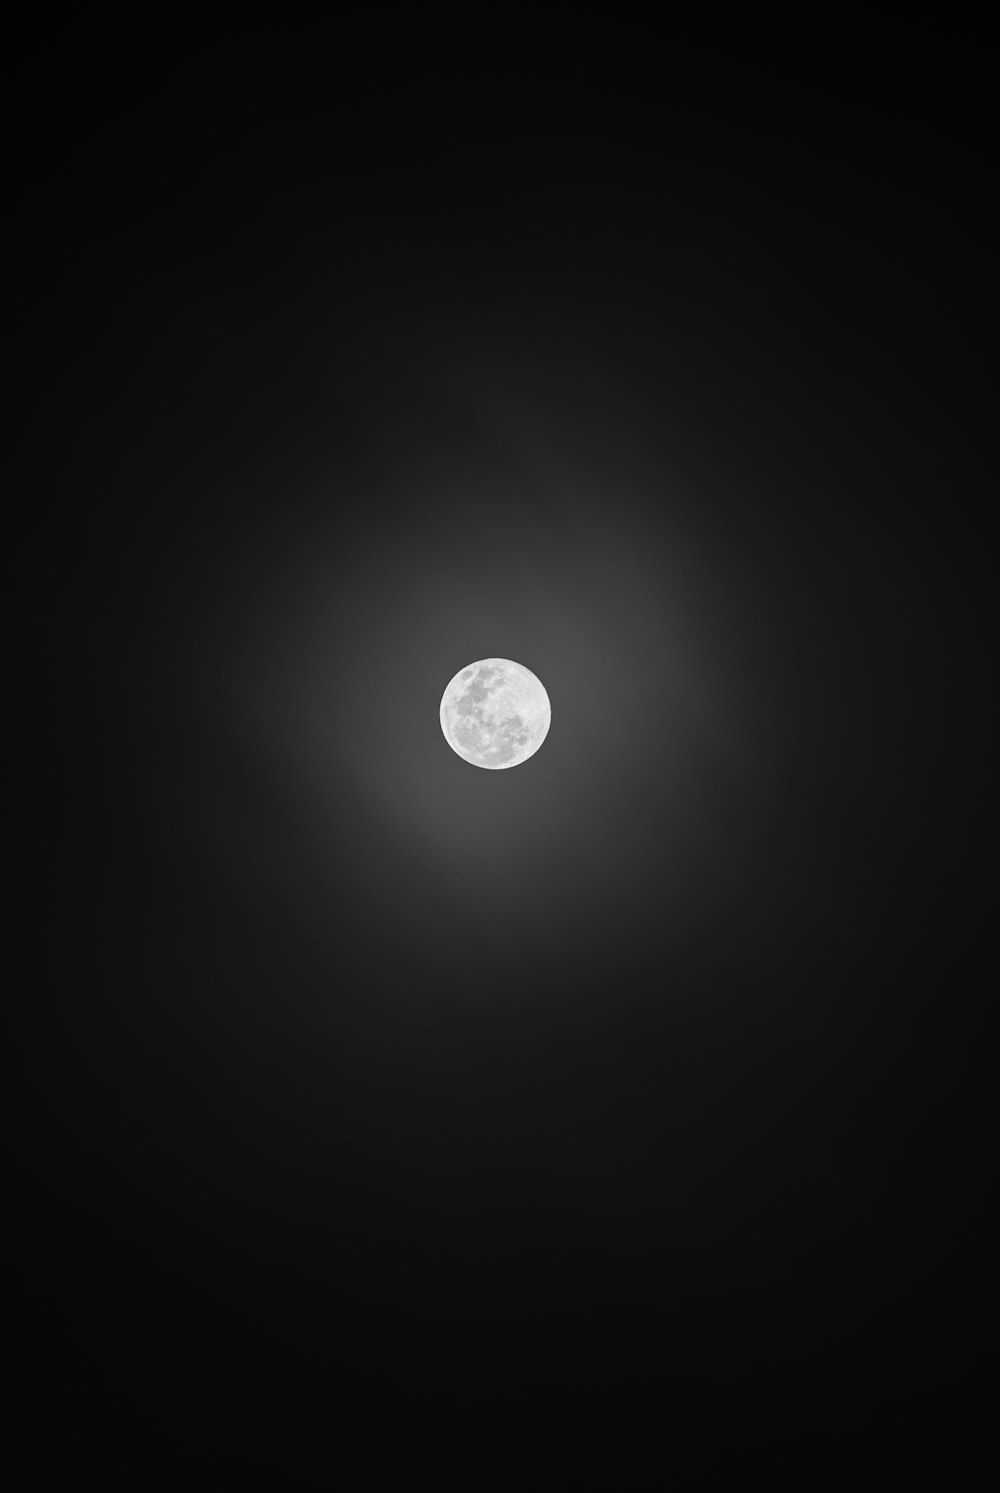 a black and white photo of a full moon